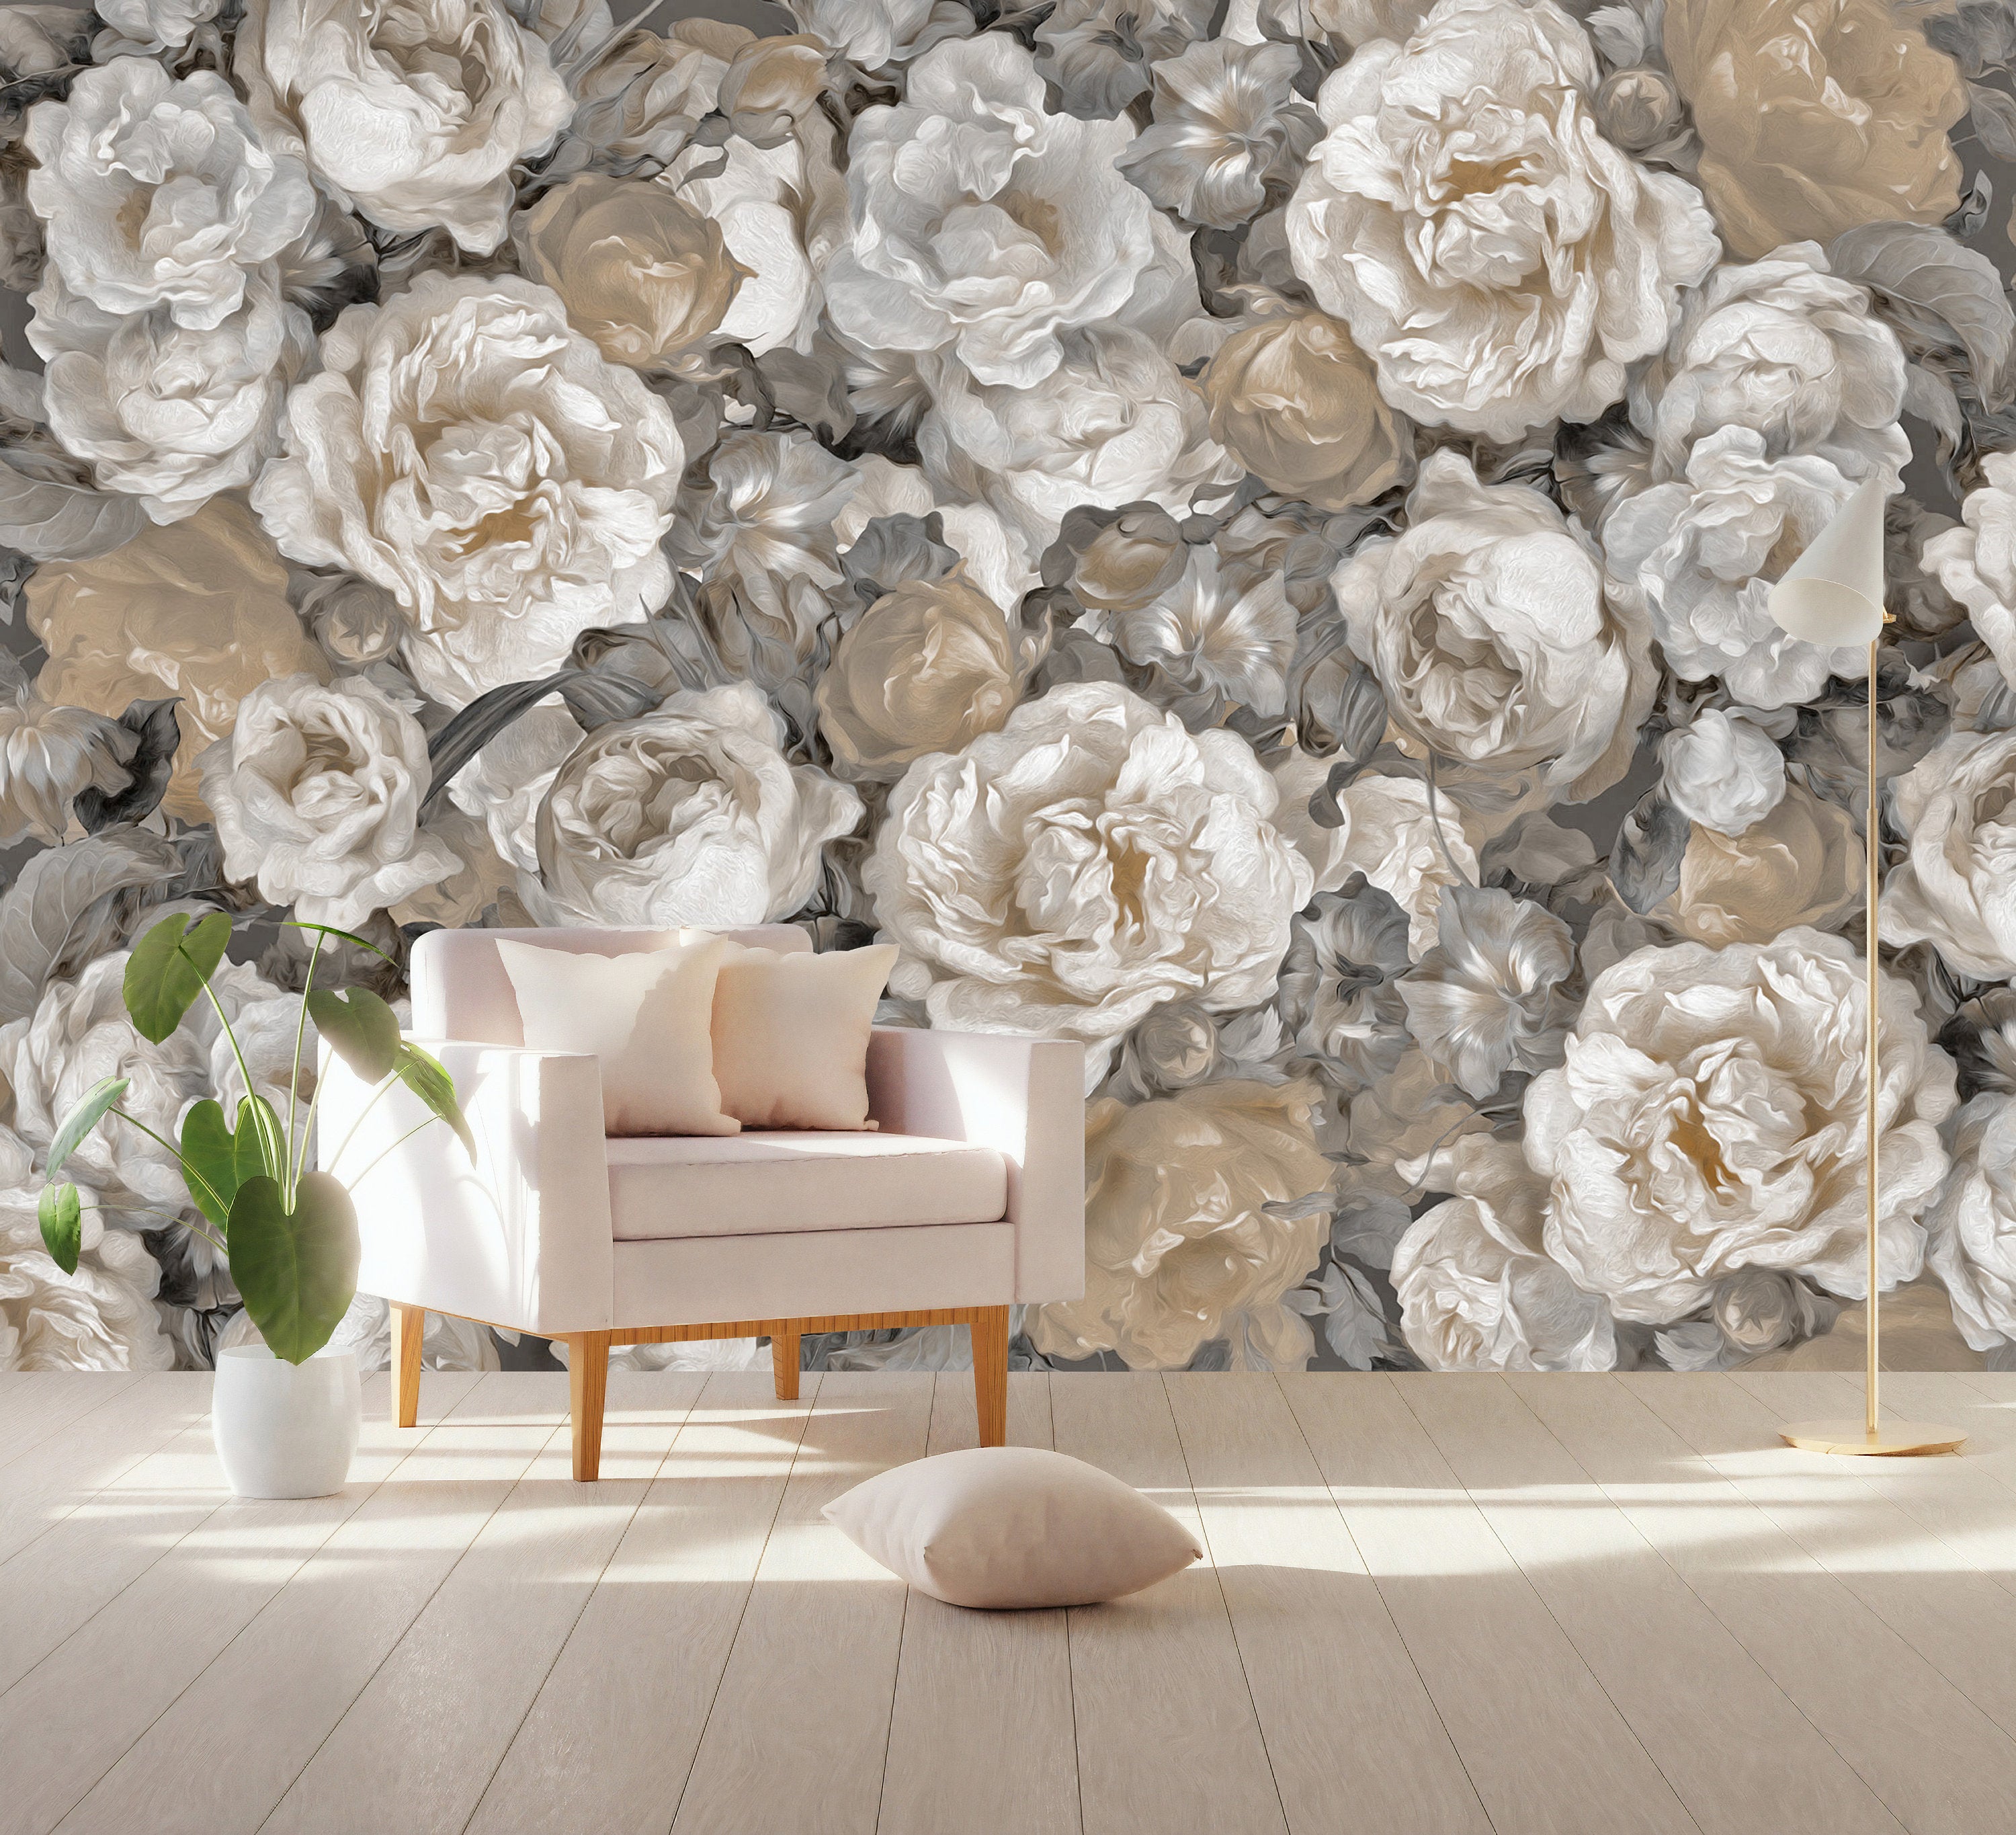 Colorful Roses Flowers Luxury BackgroundWallpaper Restaurant Self Adhesive Peel & Stick Wall Sticker Wall Decoration Scandinavian Removable